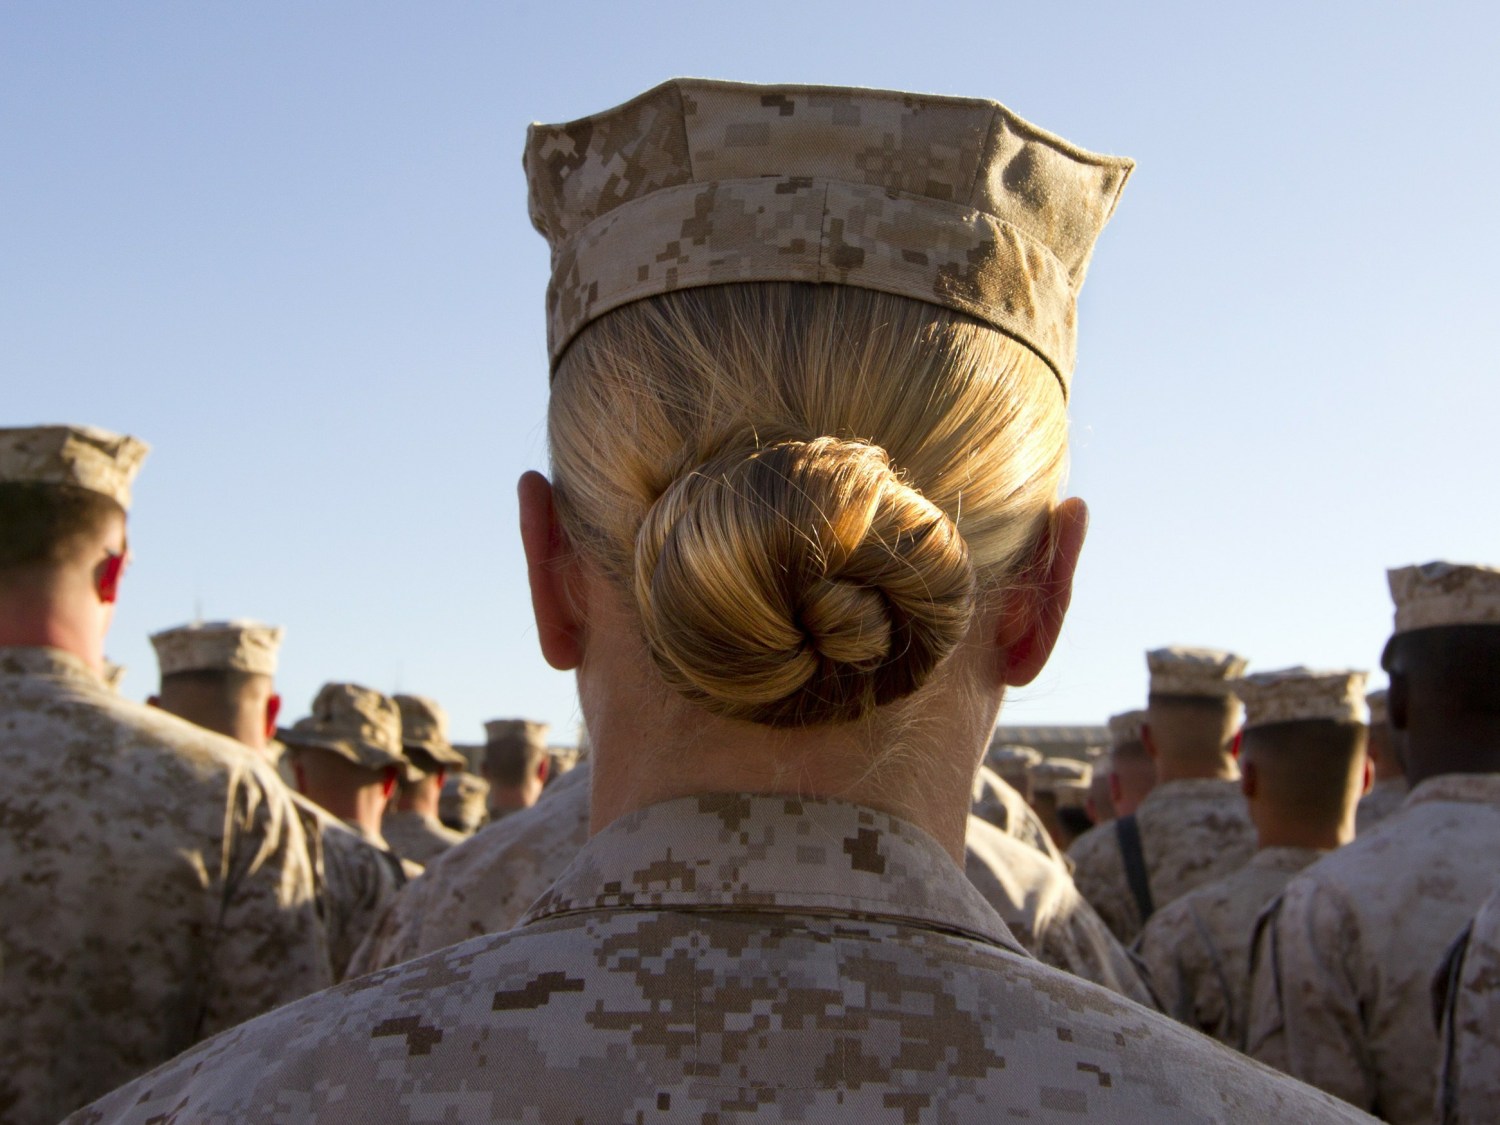 Military Uniform Porn Captions - 2 Marines Demoted, More Investigated In Nude Photo Probe